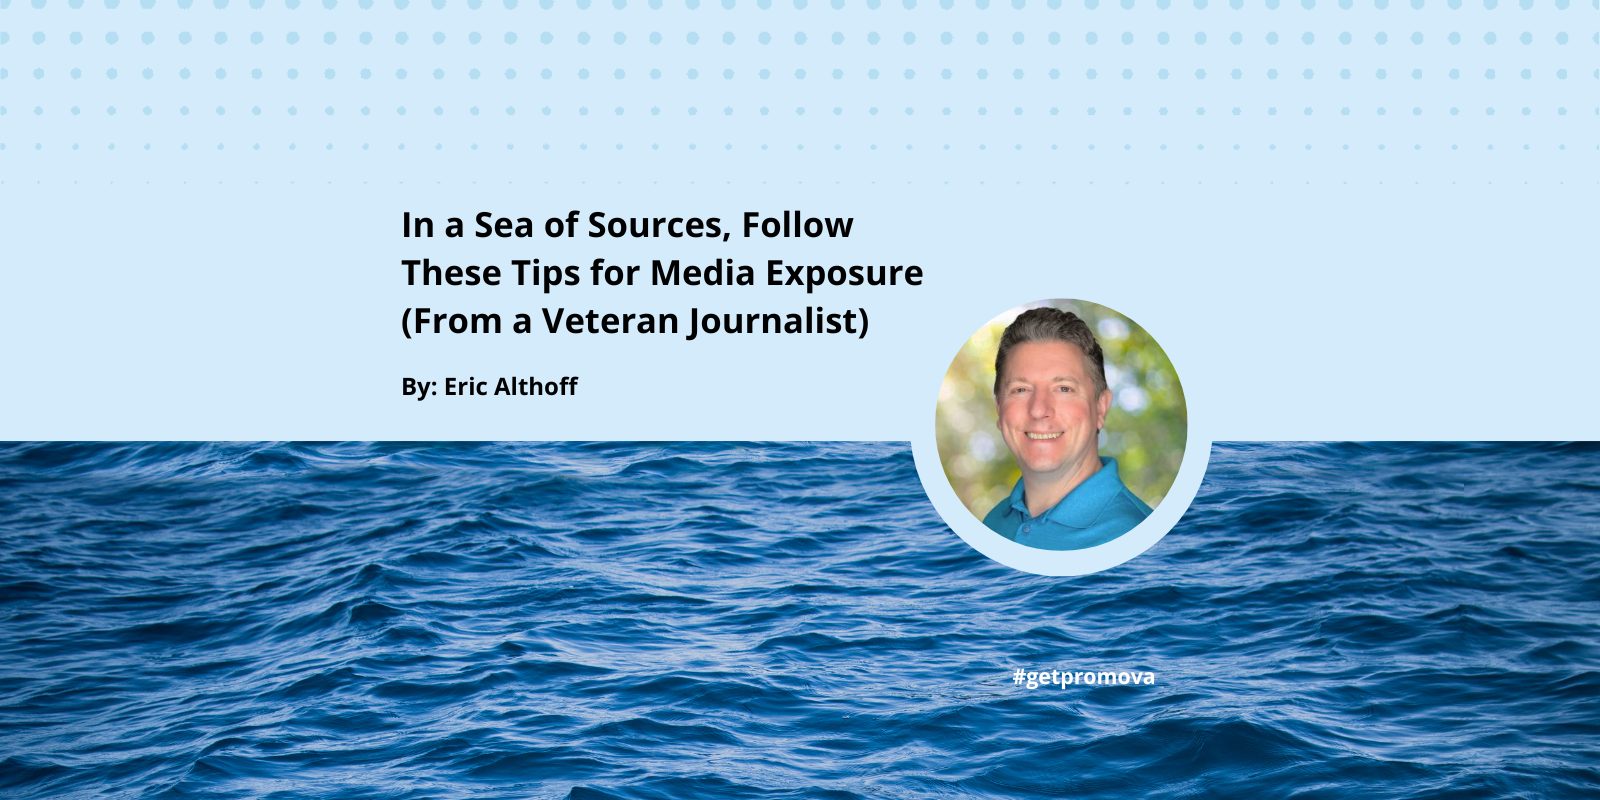 Featured image for “In a Sea of Sources, Follow These Tips for Media Exposure (From a Veteran Journalist)”